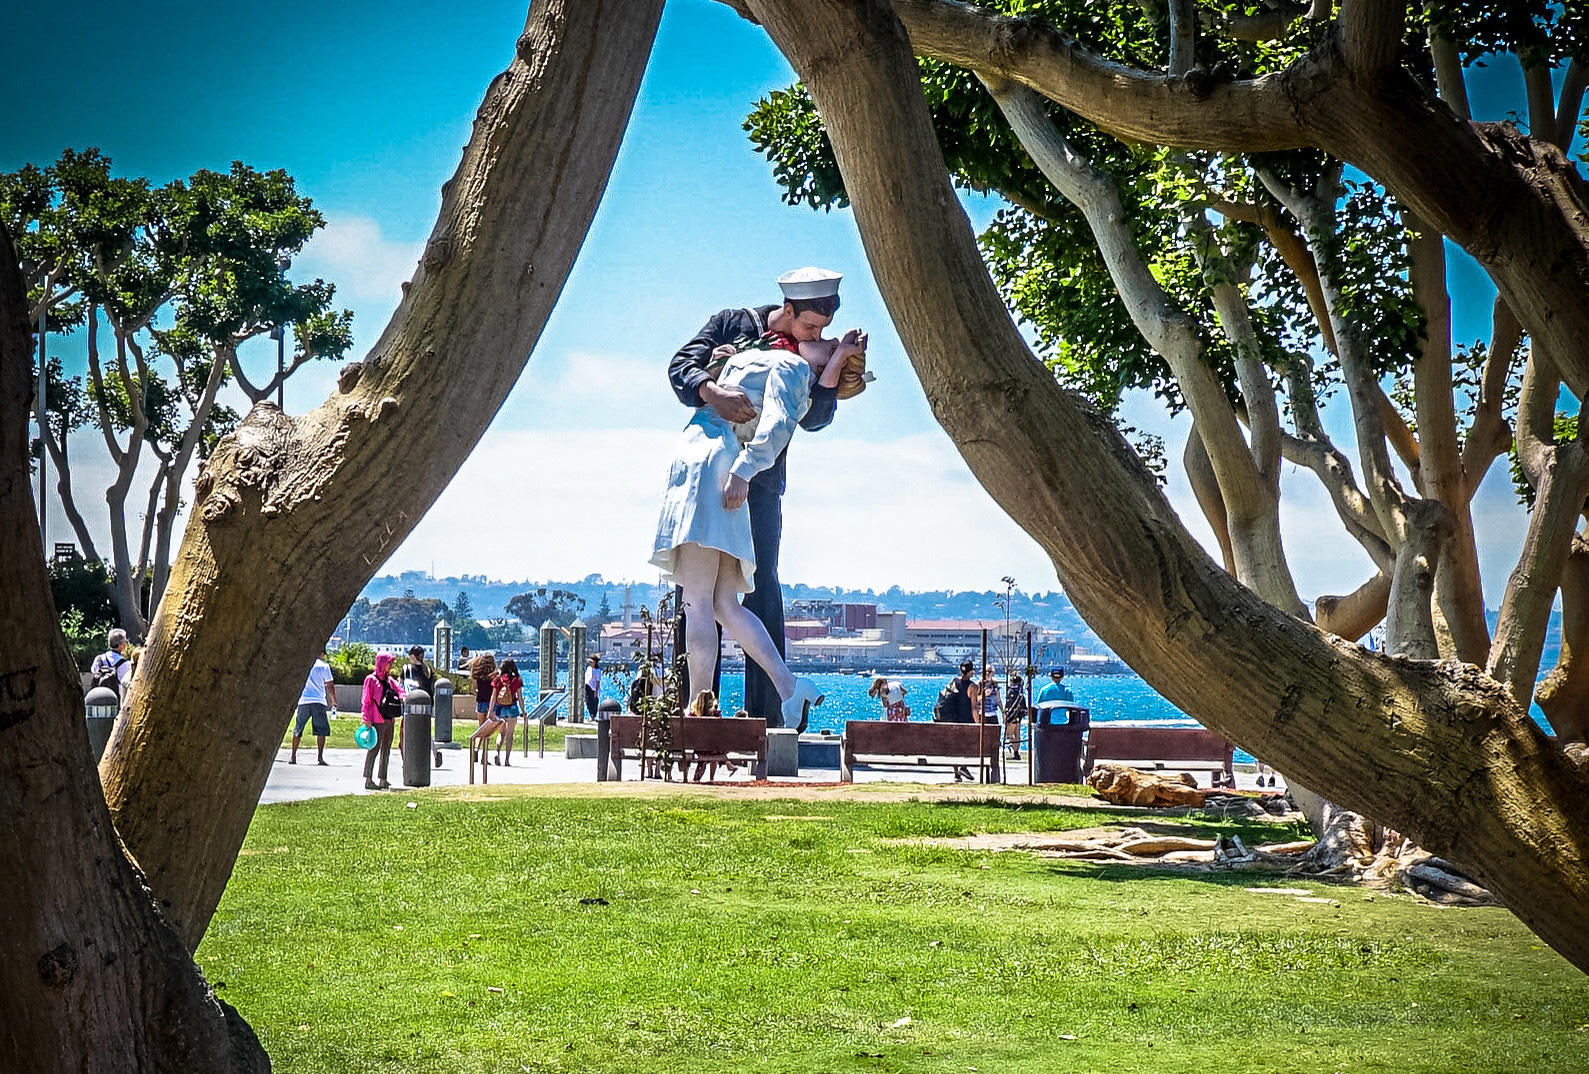 10 Things to Do in San Diego